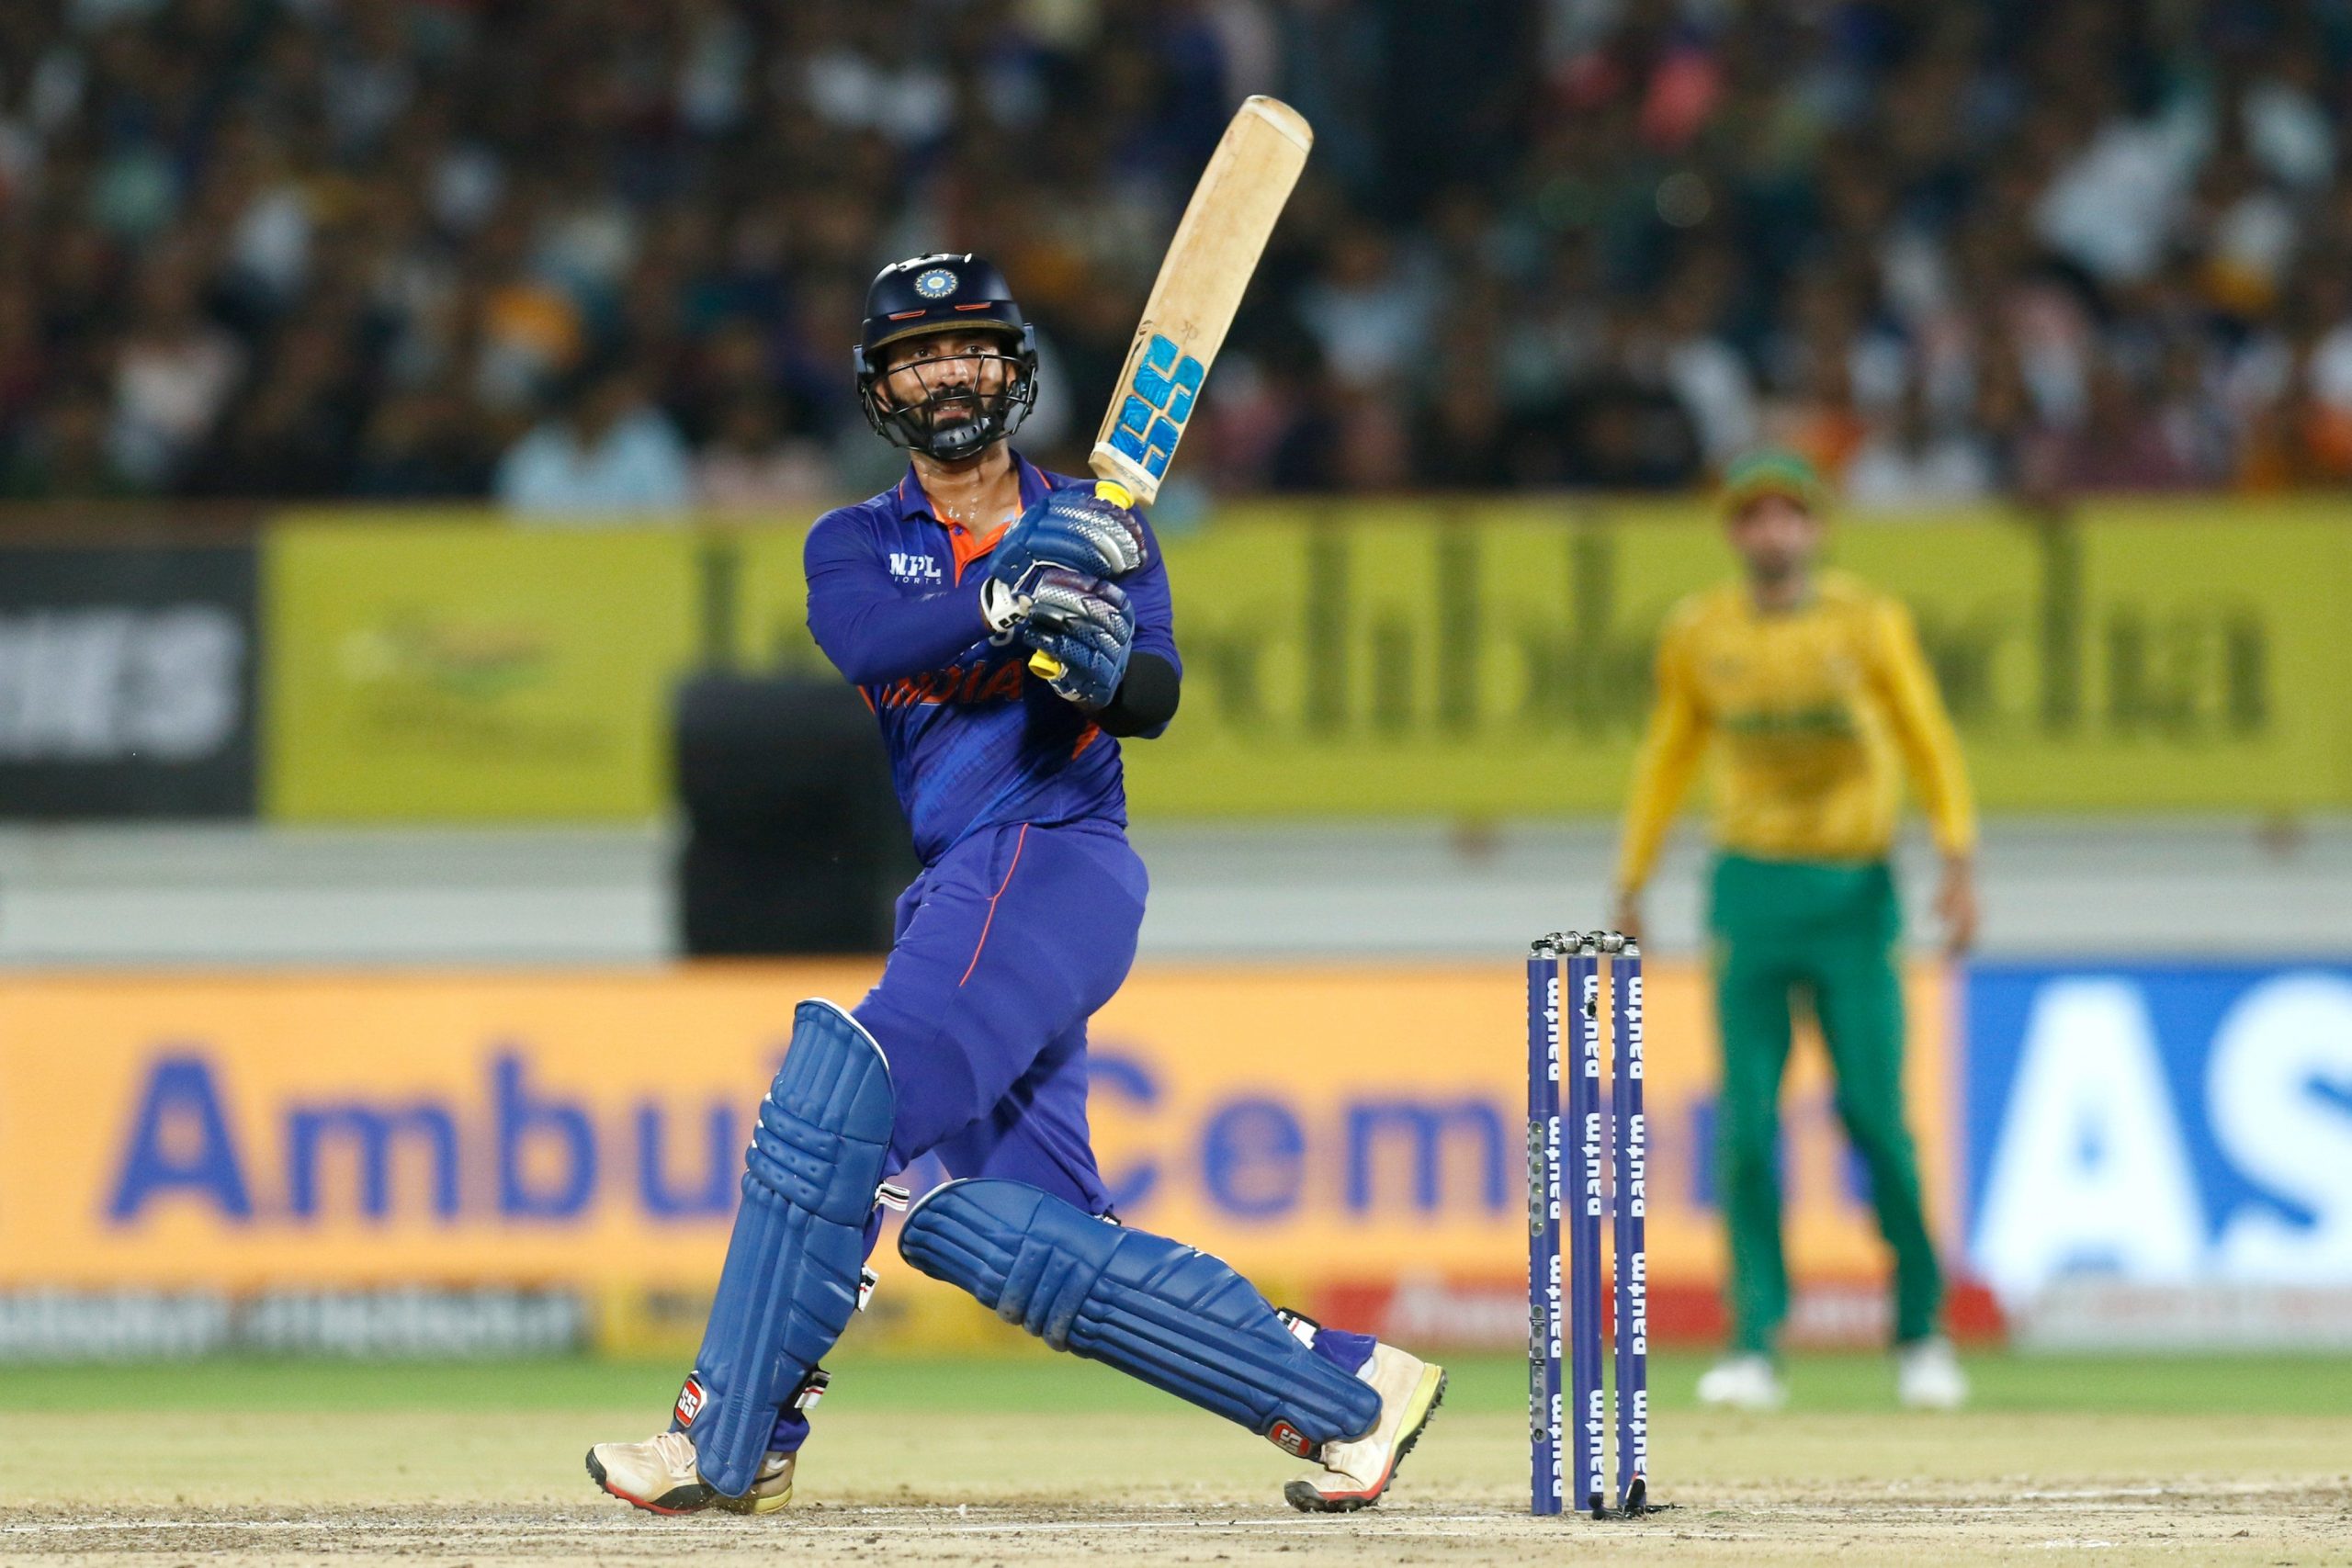 Watch: Dinesh Karthik, wicket-keeper 24×7, sees balls where there are none